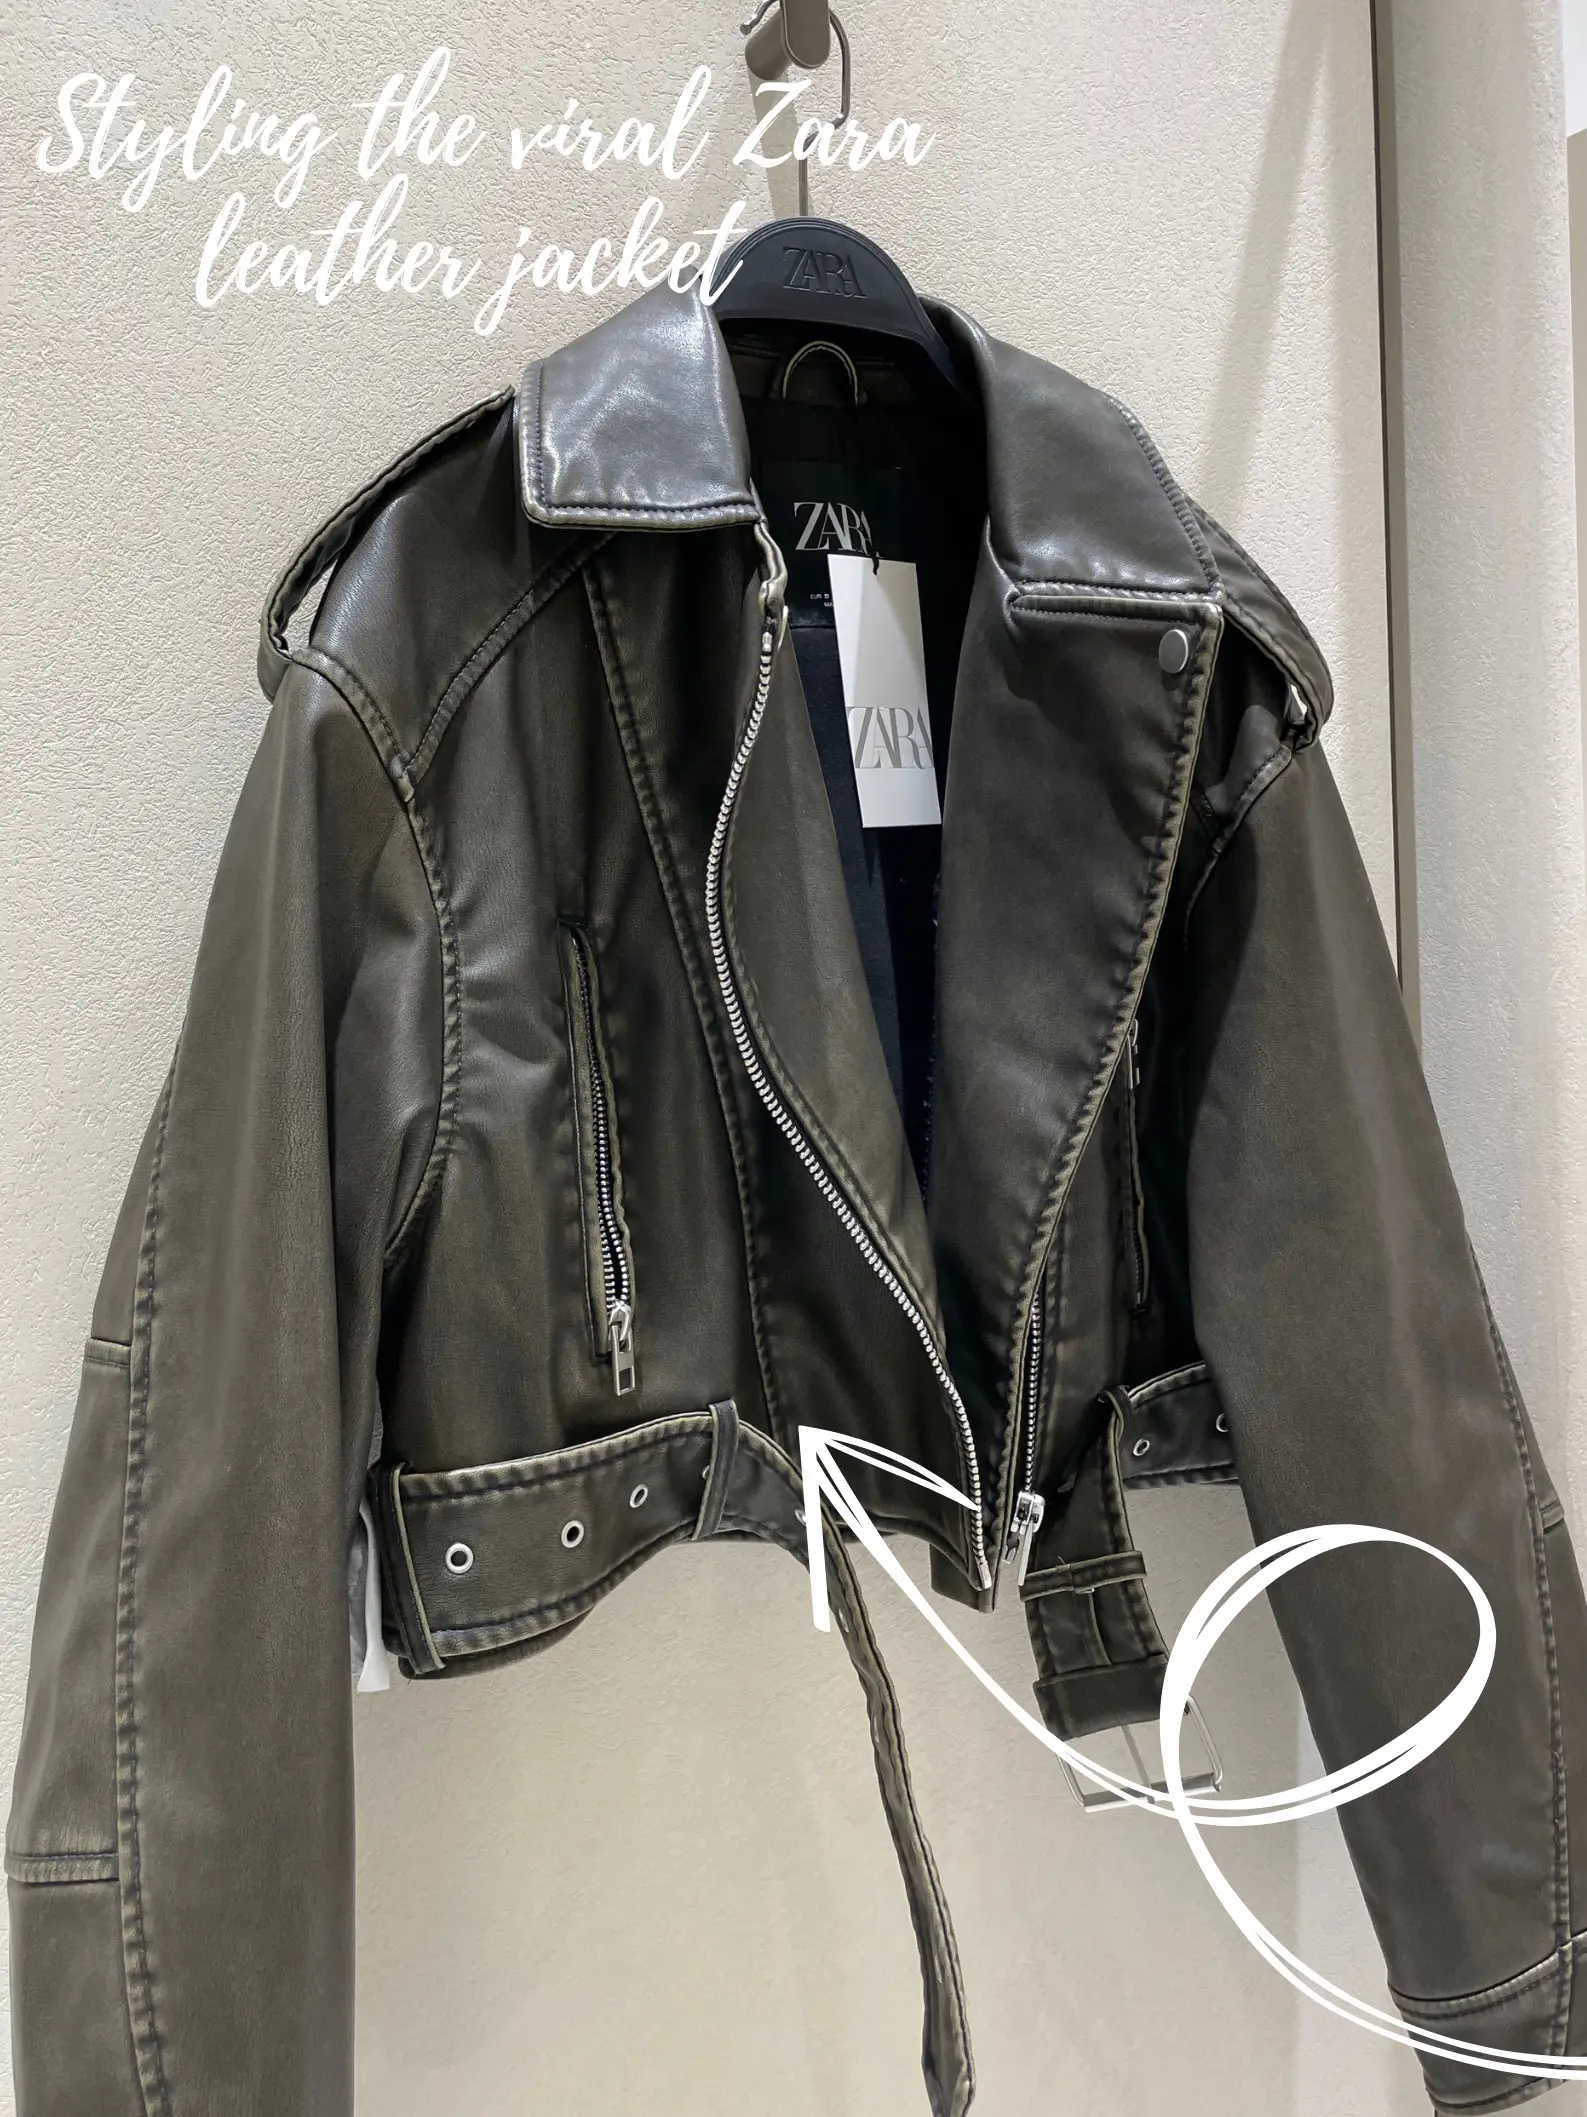 Styling the viral Zara leather jacket 🧥, Gallery posted by Innaya Nailah